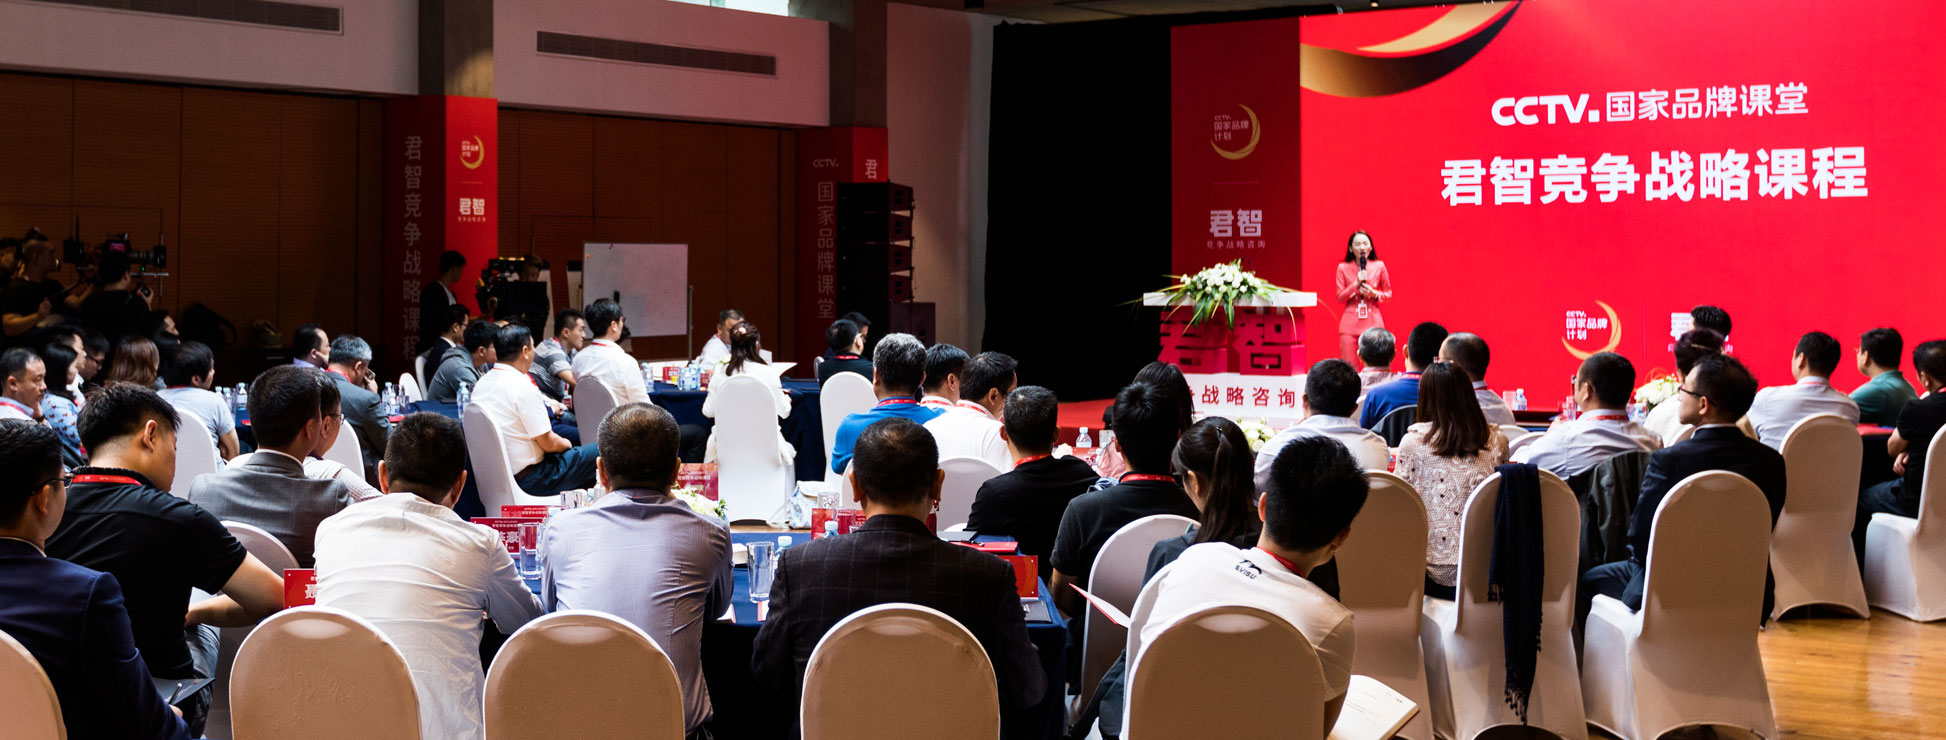 In 2018, CCTV National Brand Class - Kmind Competitive Strategy Course was launched